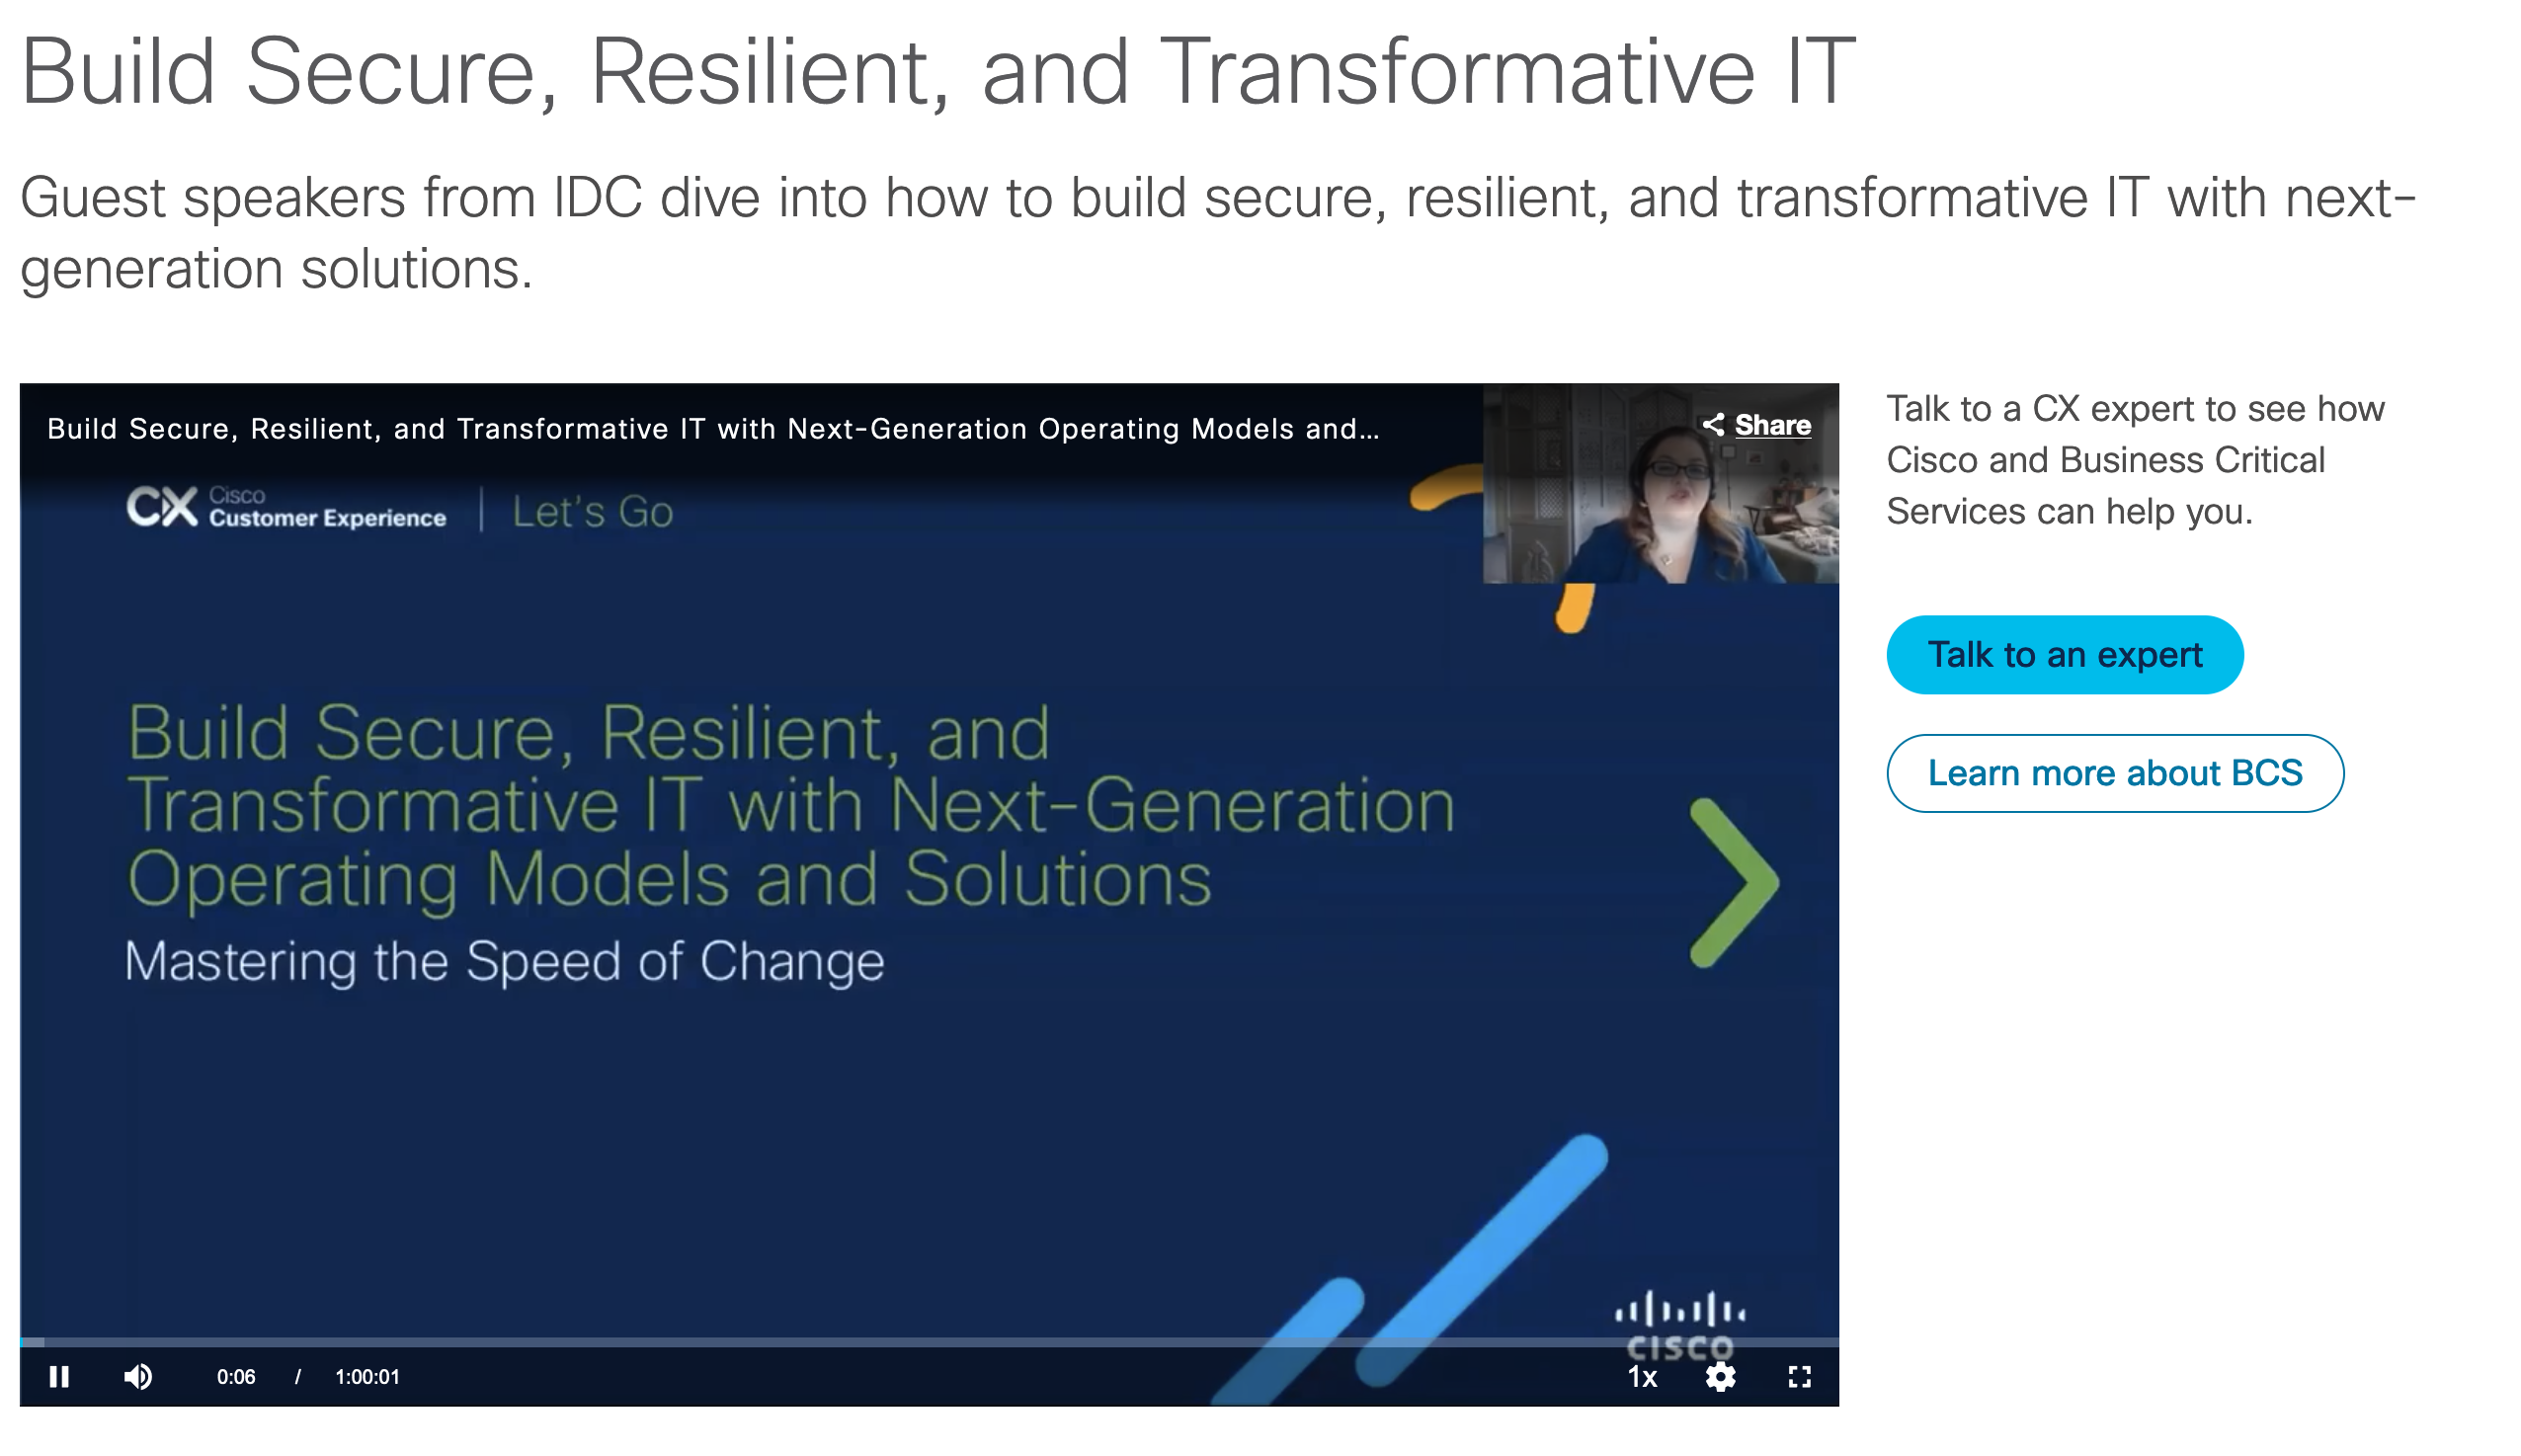 Build Secure, Resilient, and Transformative IT: Webcast